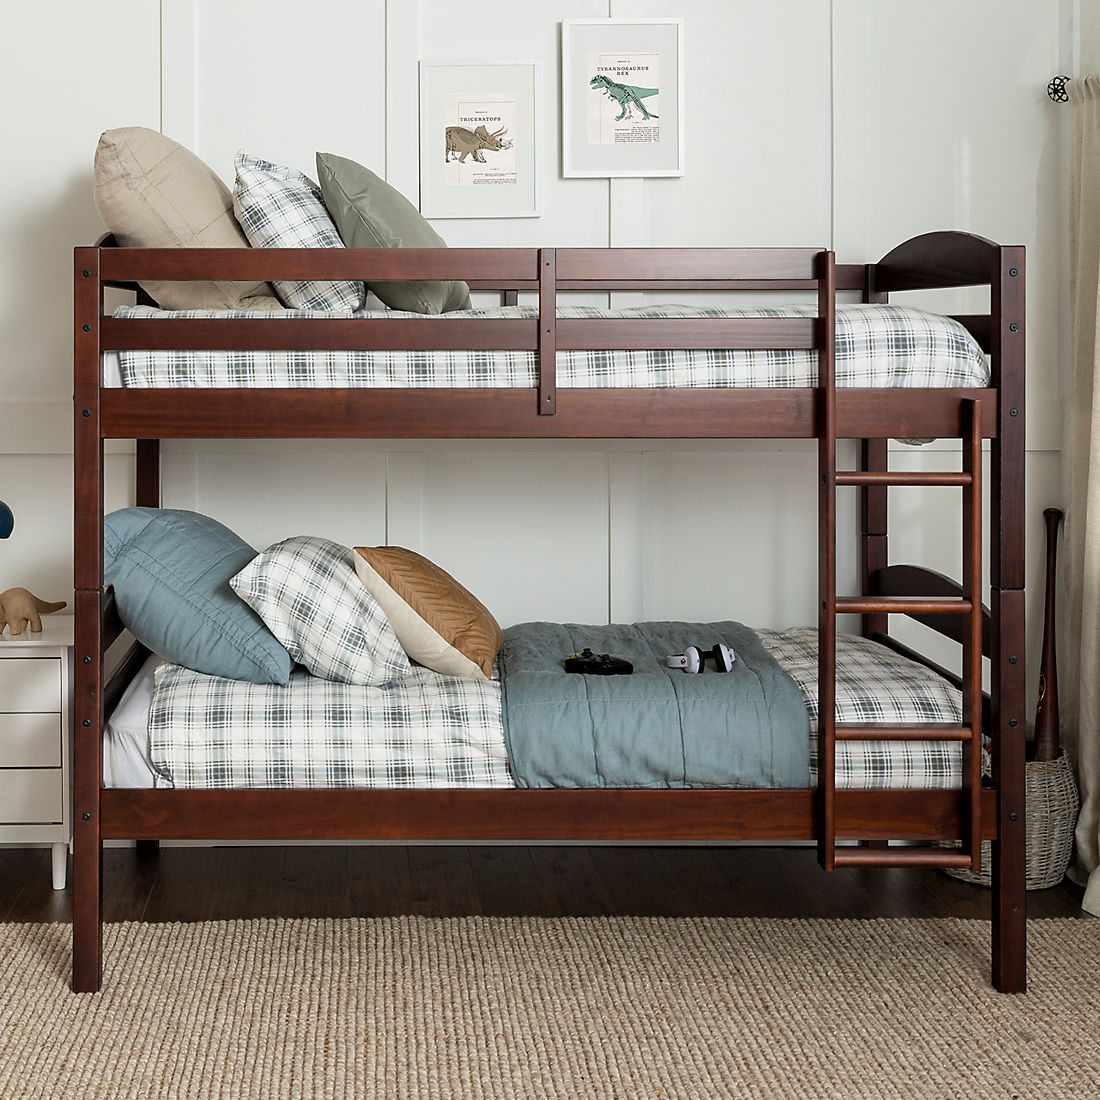 W Trends Twin Size Solid Wood Bunk Bed, Berkley Jensen Bunk Bed With Trundle Instructions